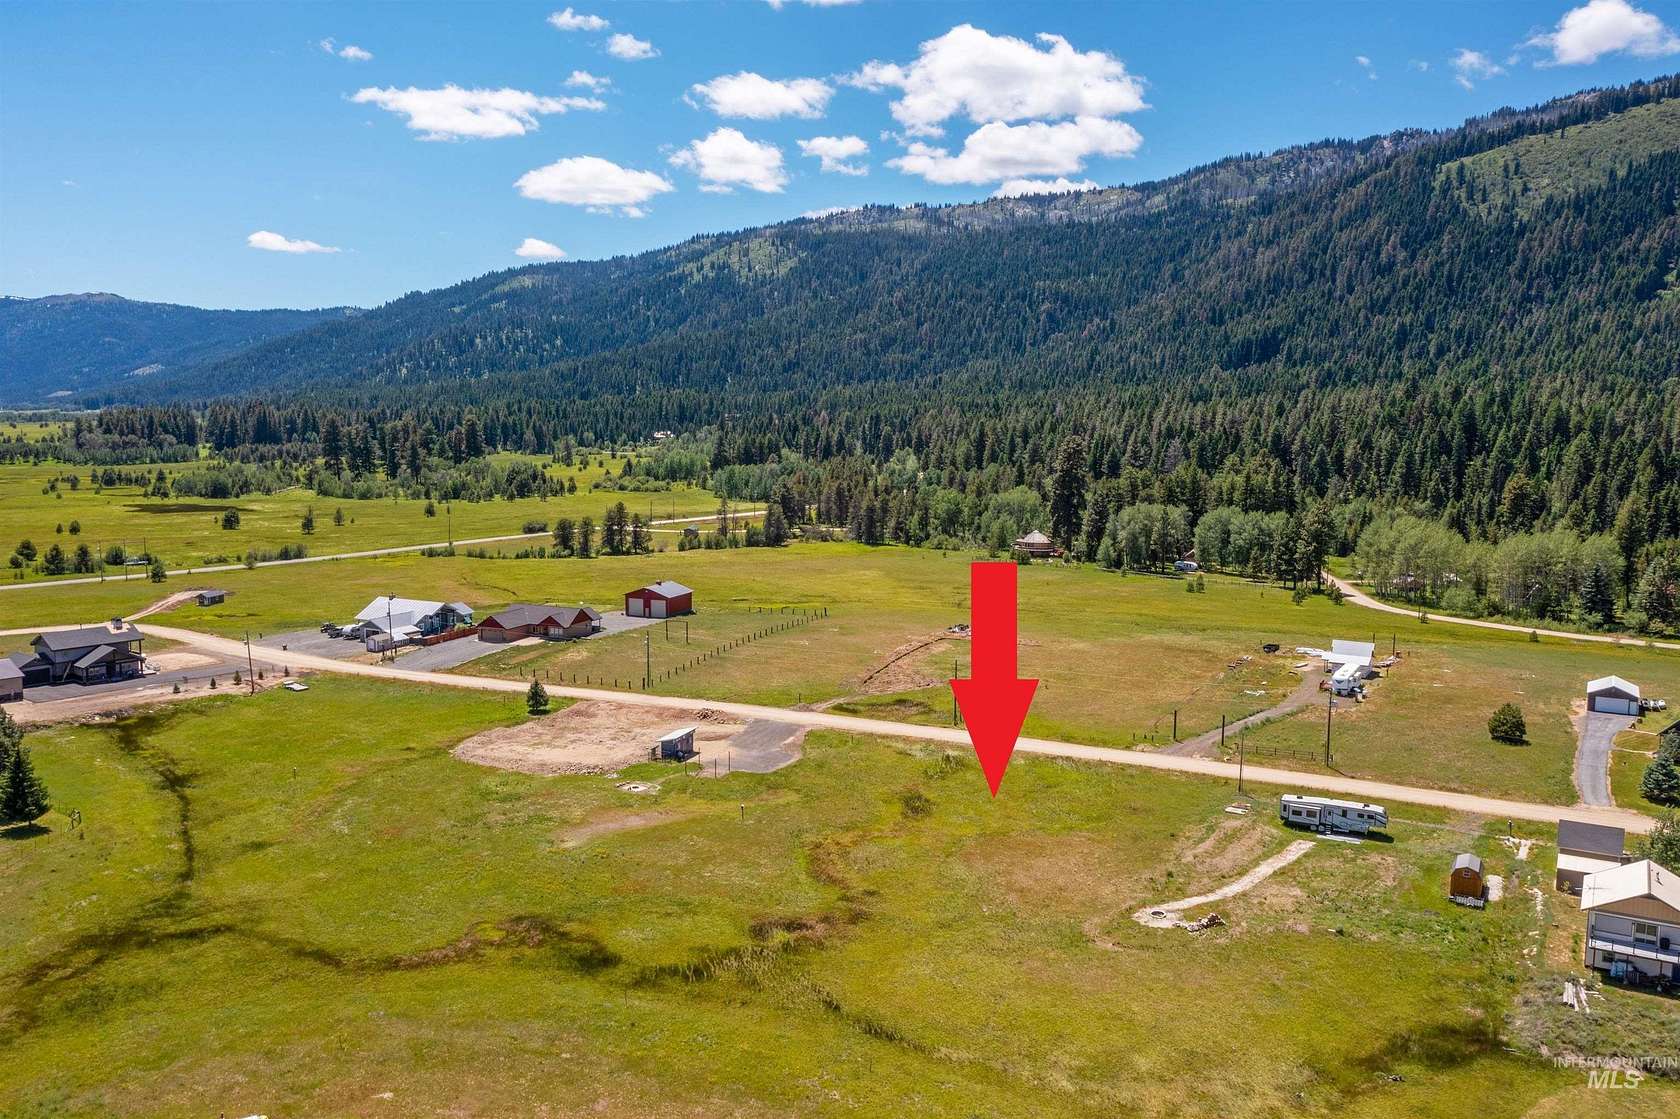 0.68 Acres of Land for Sale in Donnelly, Idaho